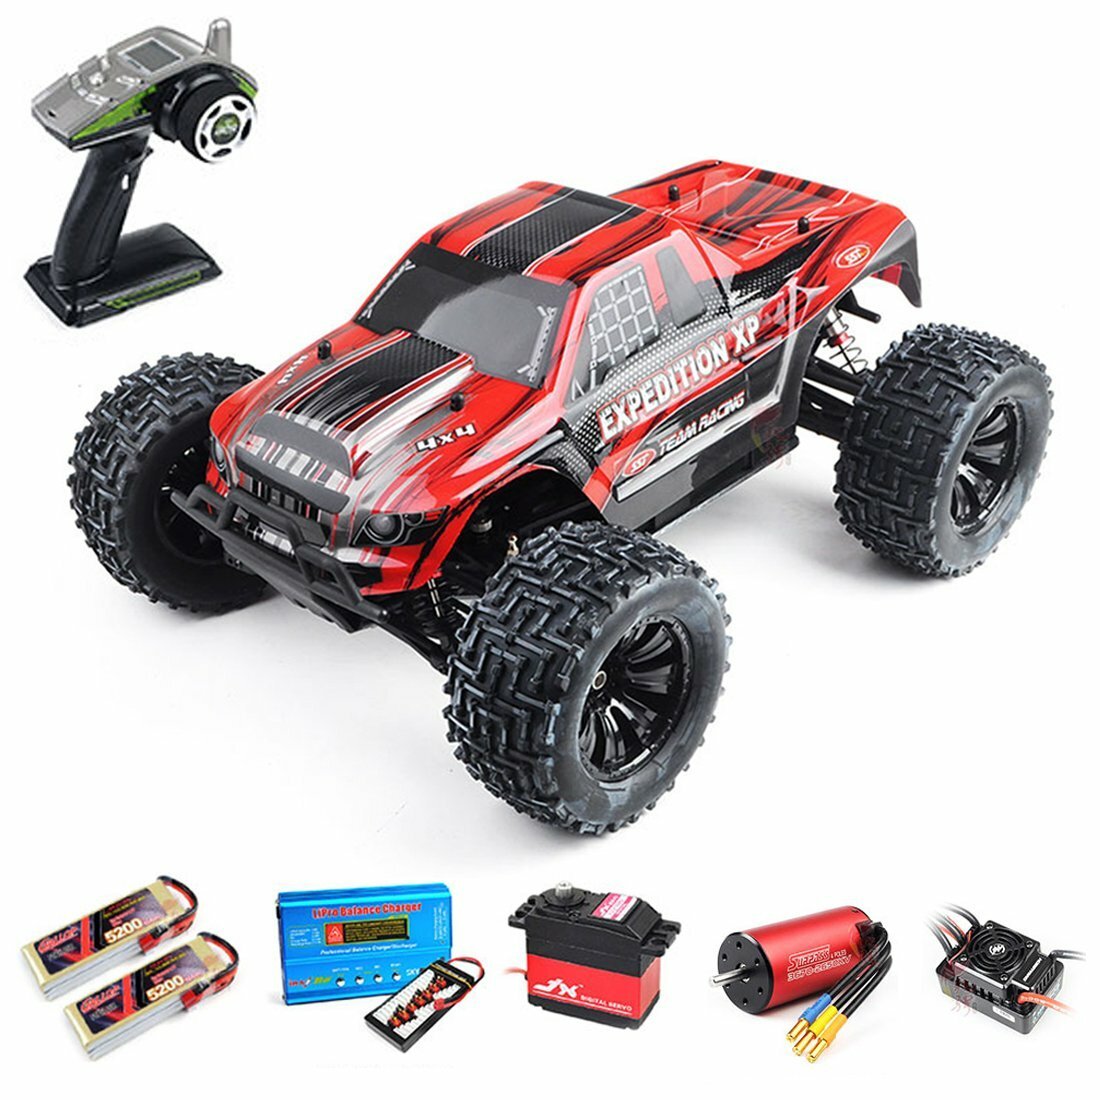 YK 4102PRO 1/10 2.4G 6CH 4WD Off Road Electric RC Crawler Vehicle